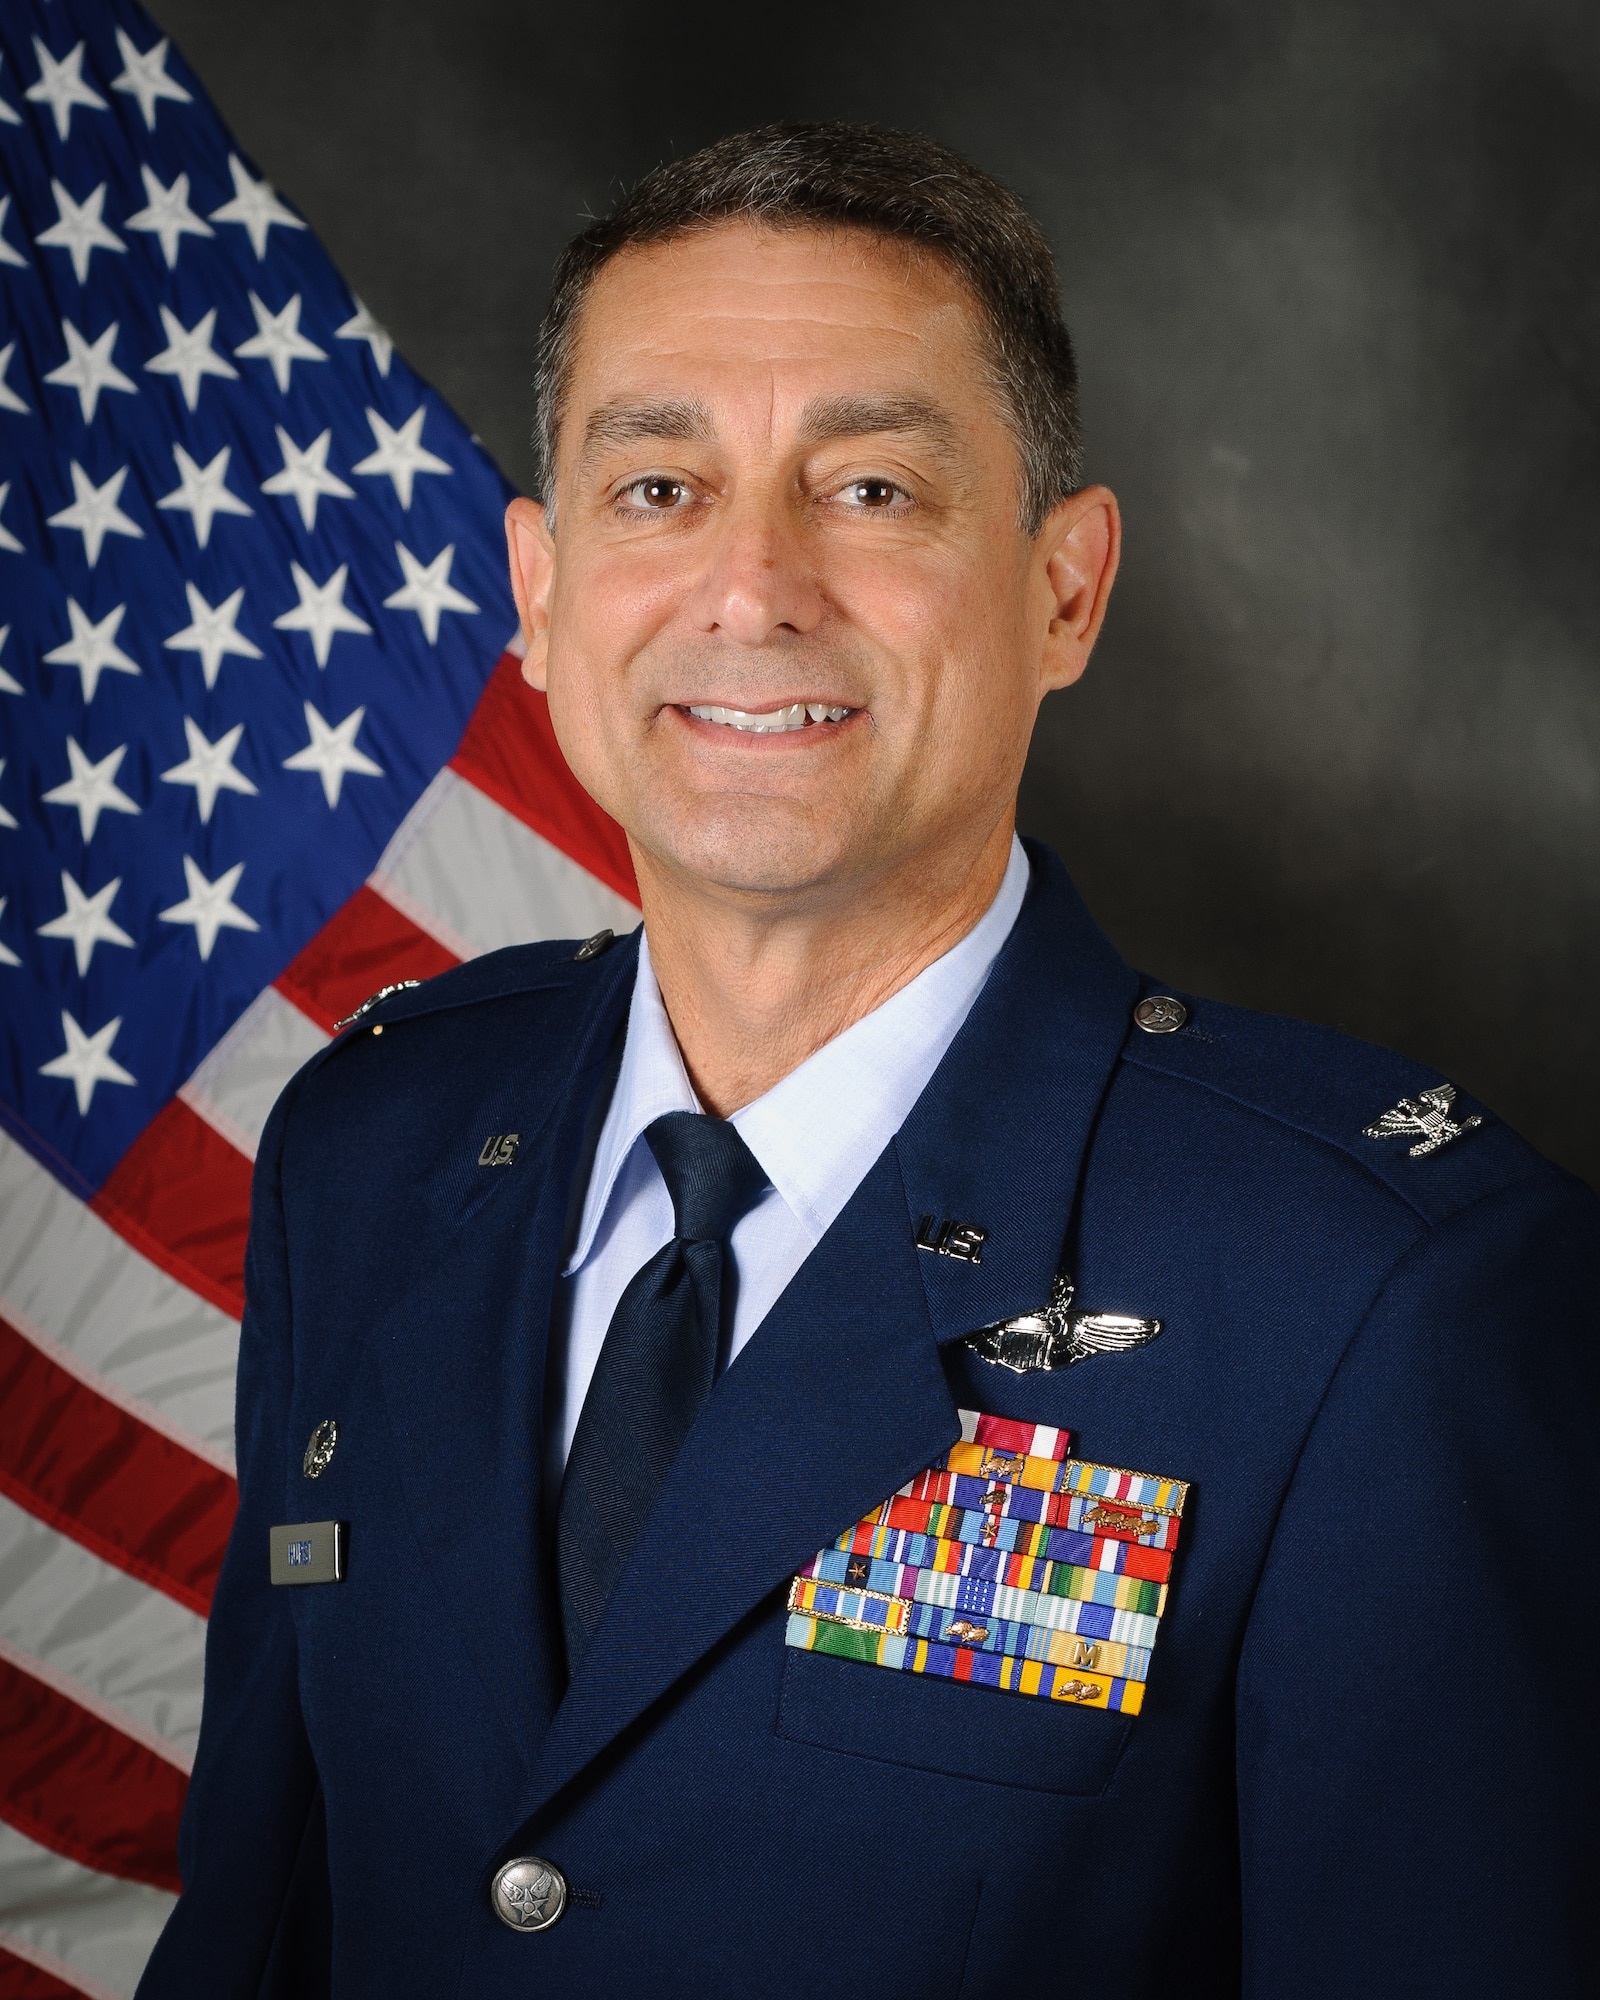 Col. Warren H. Hurst has been selected as the next commander of the Kentucky Air National Guard's 123rd Airlift Wing, Kentucky's adjutant general announced Aug. 7, 2012. (U.S. Air Force photo)